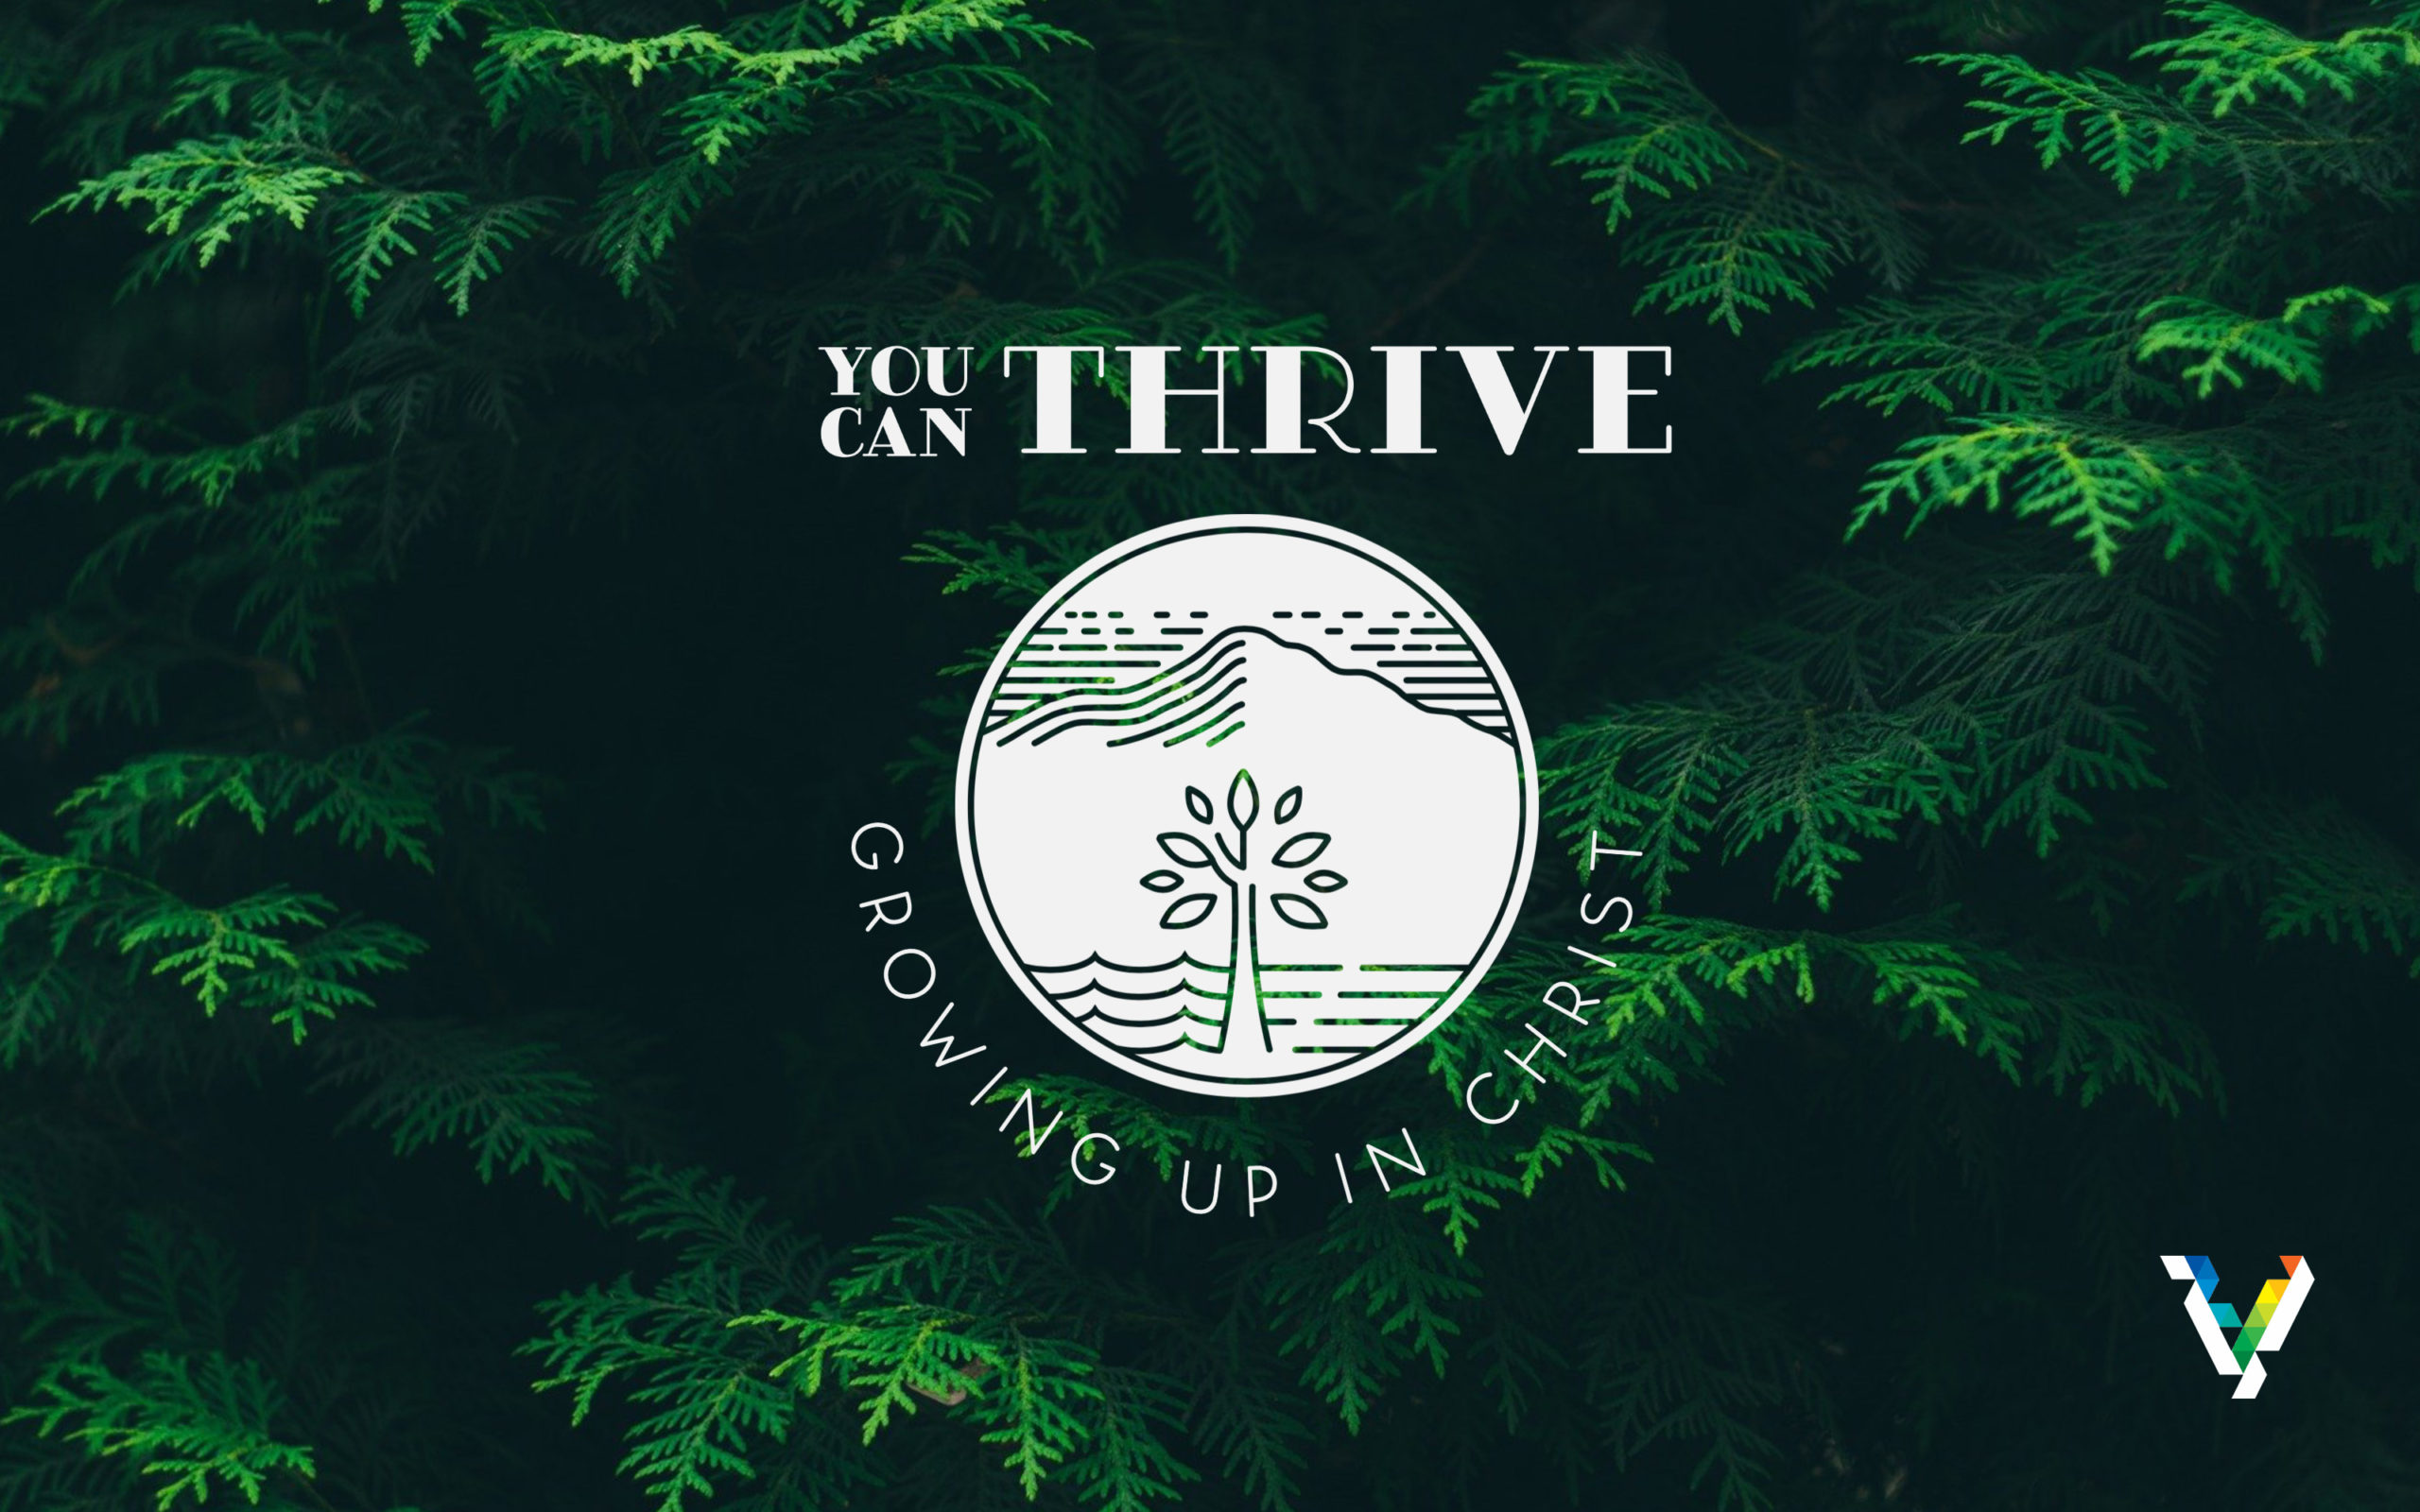 You Can Thrive: Growing Up in Christ (Studies 6-10)